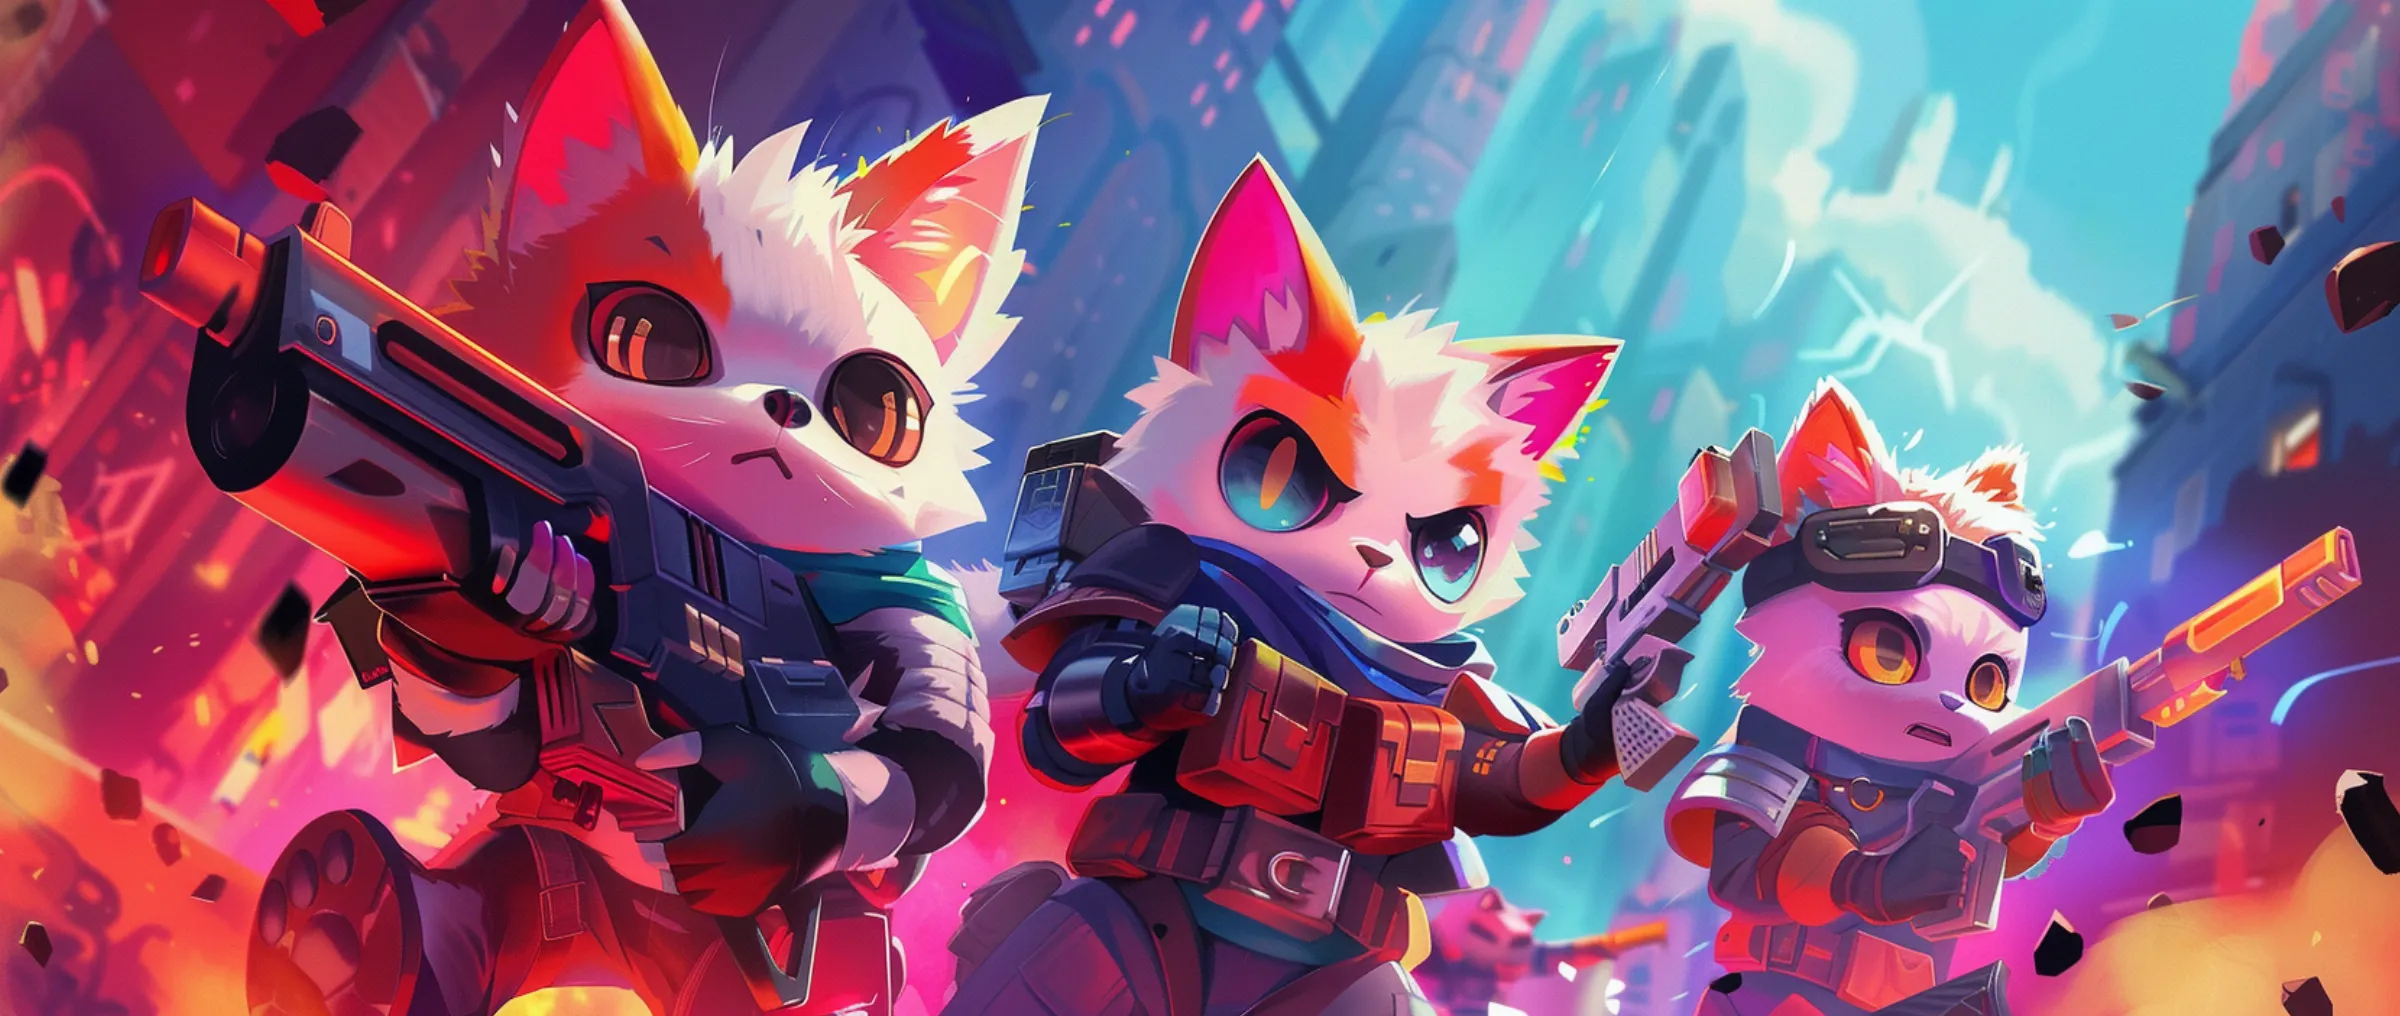 9 Lives Interactive raises $3 million for the development of Nyan Heroes